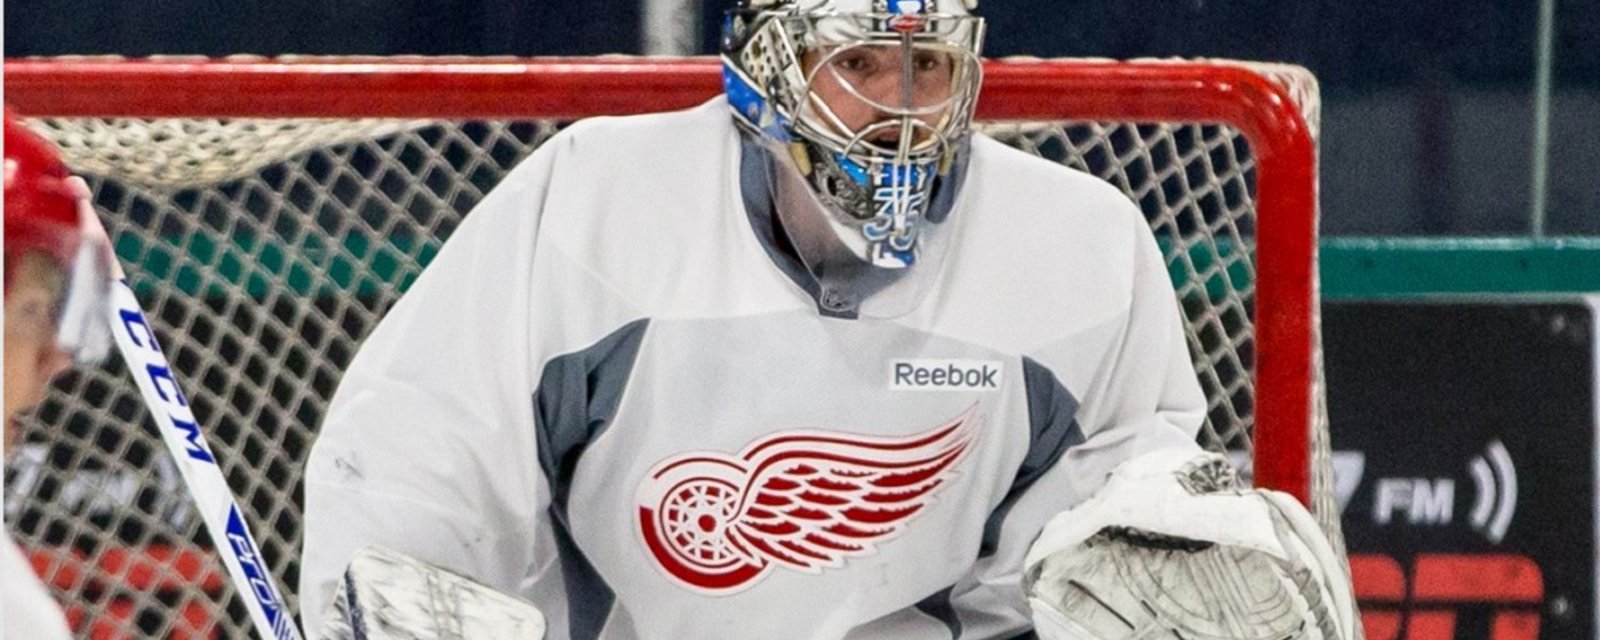 Breaking: The Detroit Red Wings have a new goaltender.